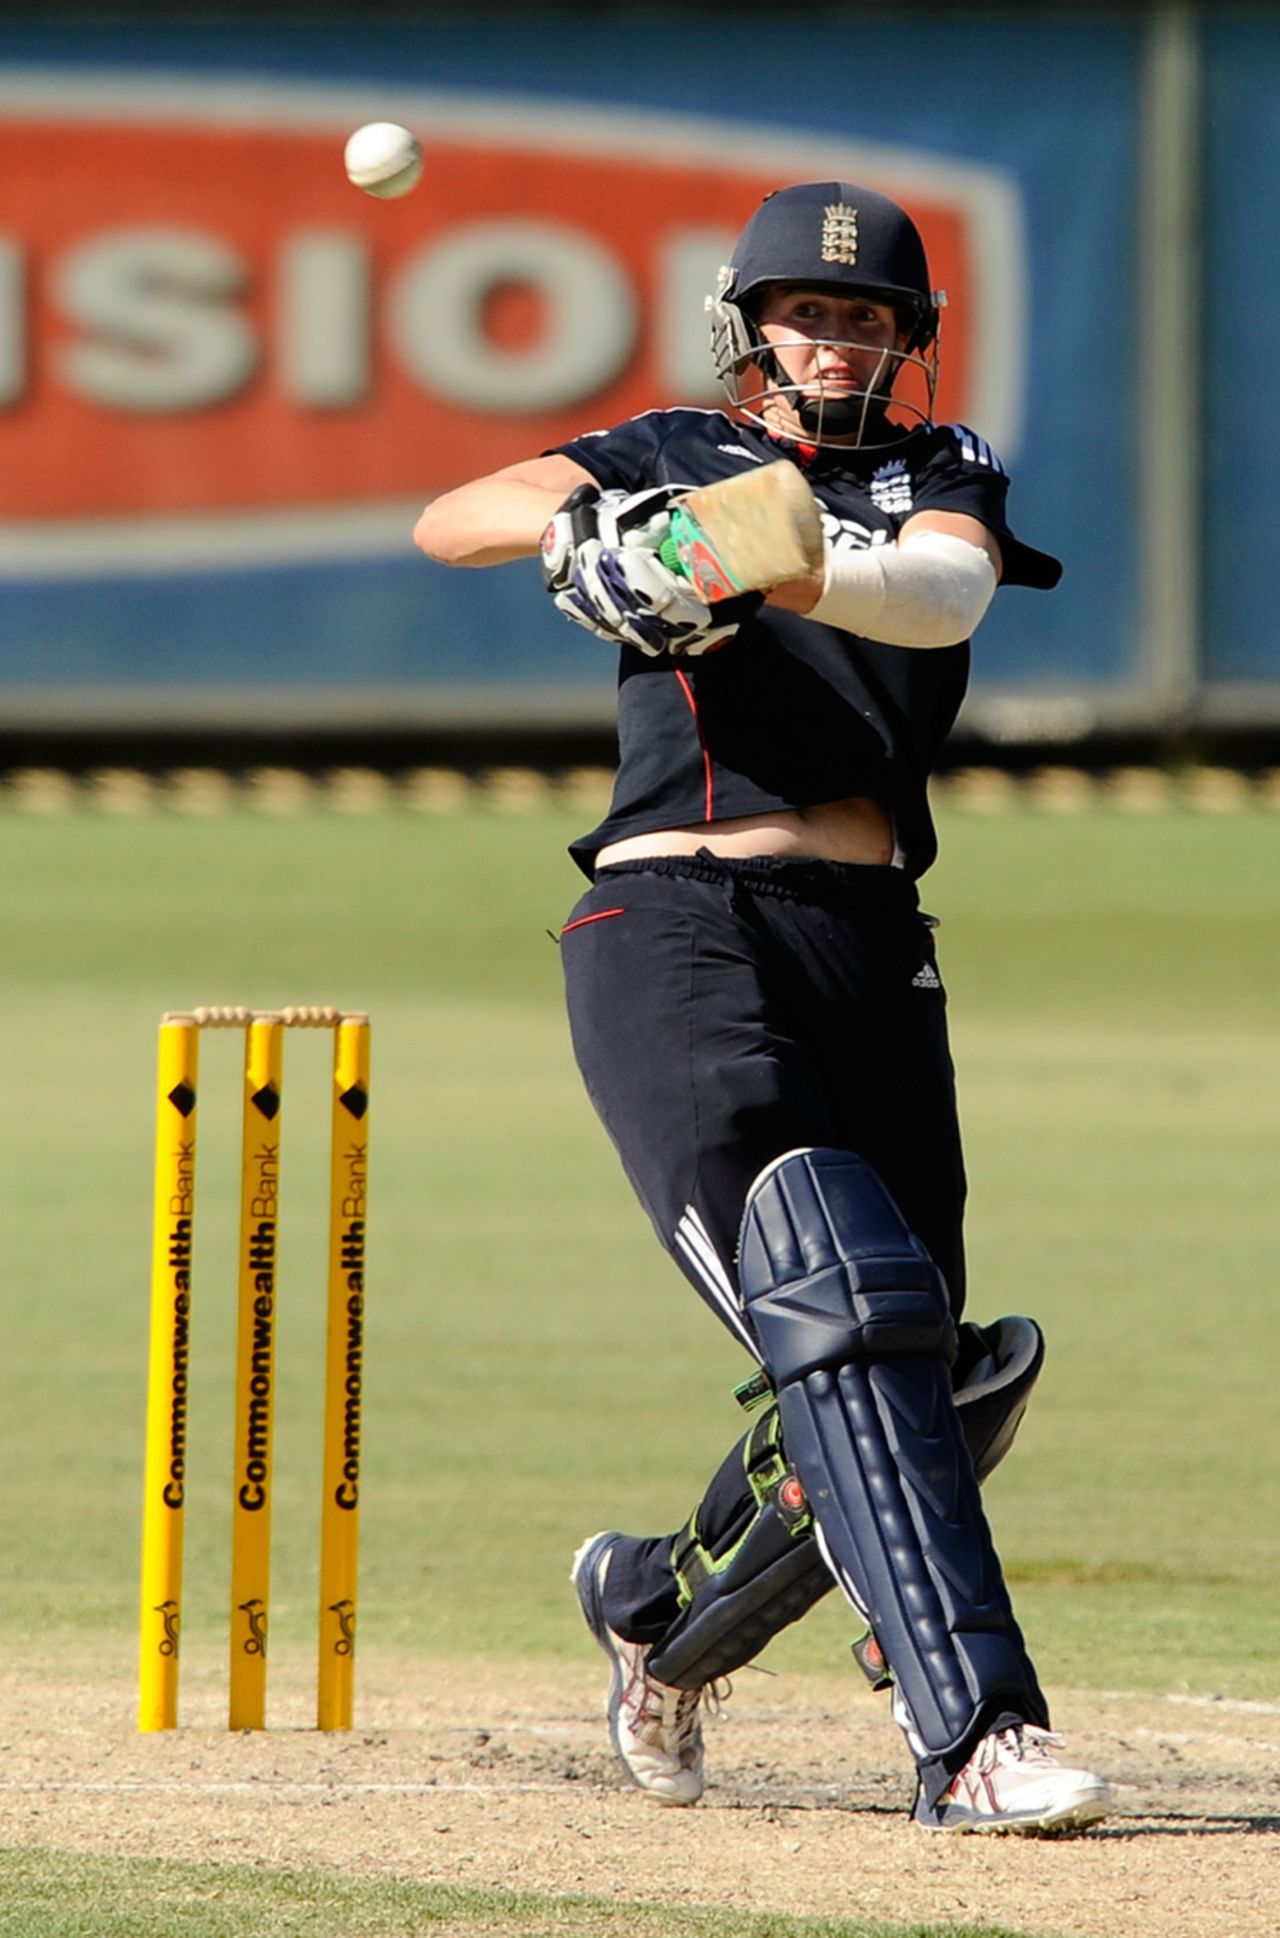 Lydia Greenway top-scored for England with 59, Australia Women v England Women, 3rd ODI, Perth, January 9, 2011